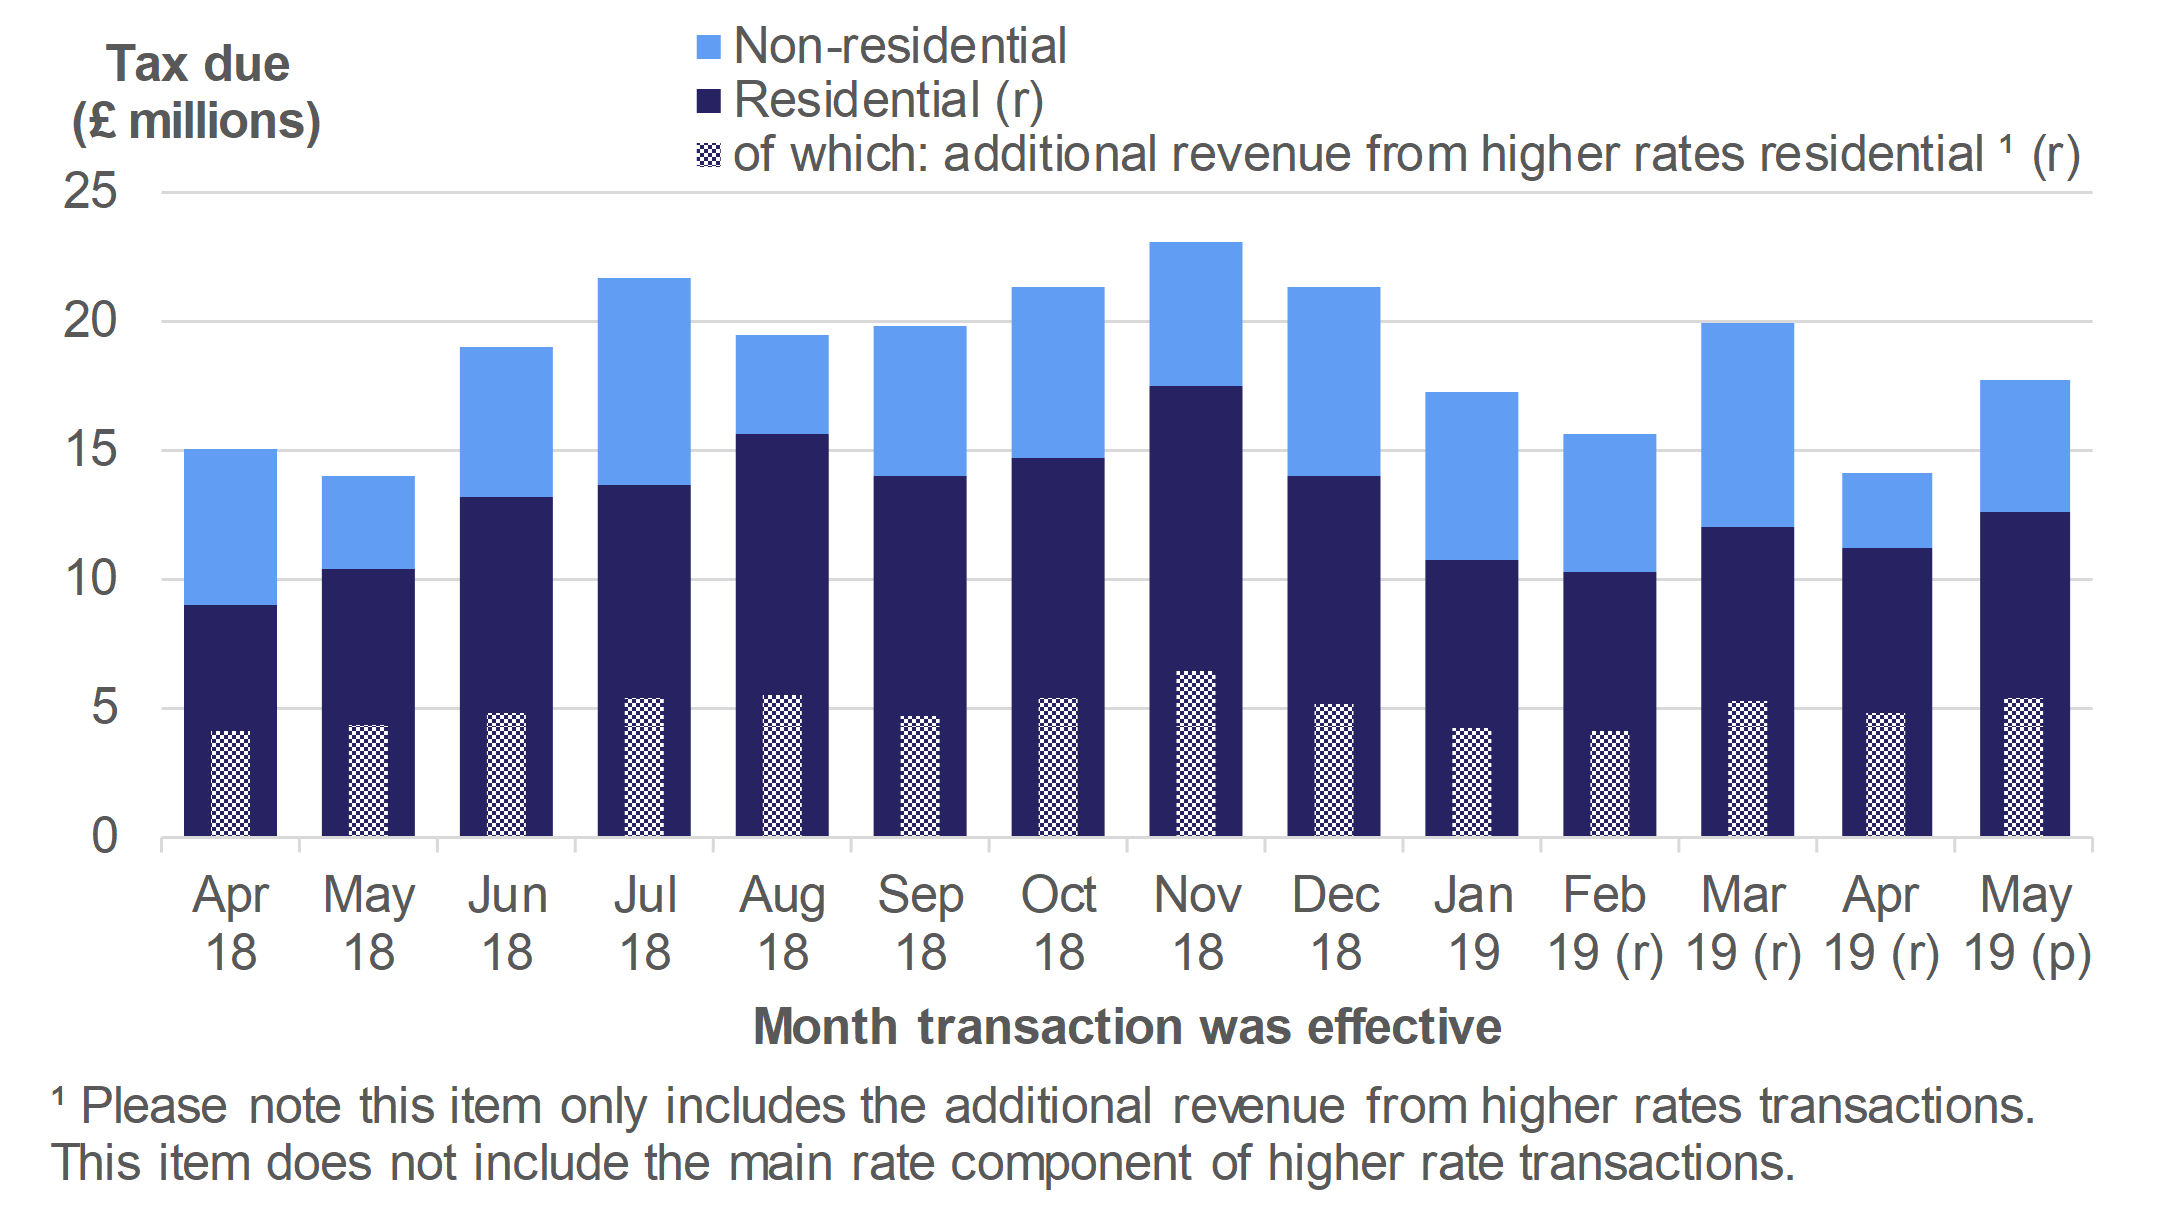 Figure 2.5 shows the monthly amount of tax due on reported notifiable transactions from April 2018 to May 2019, for residential and non-residential transactions.